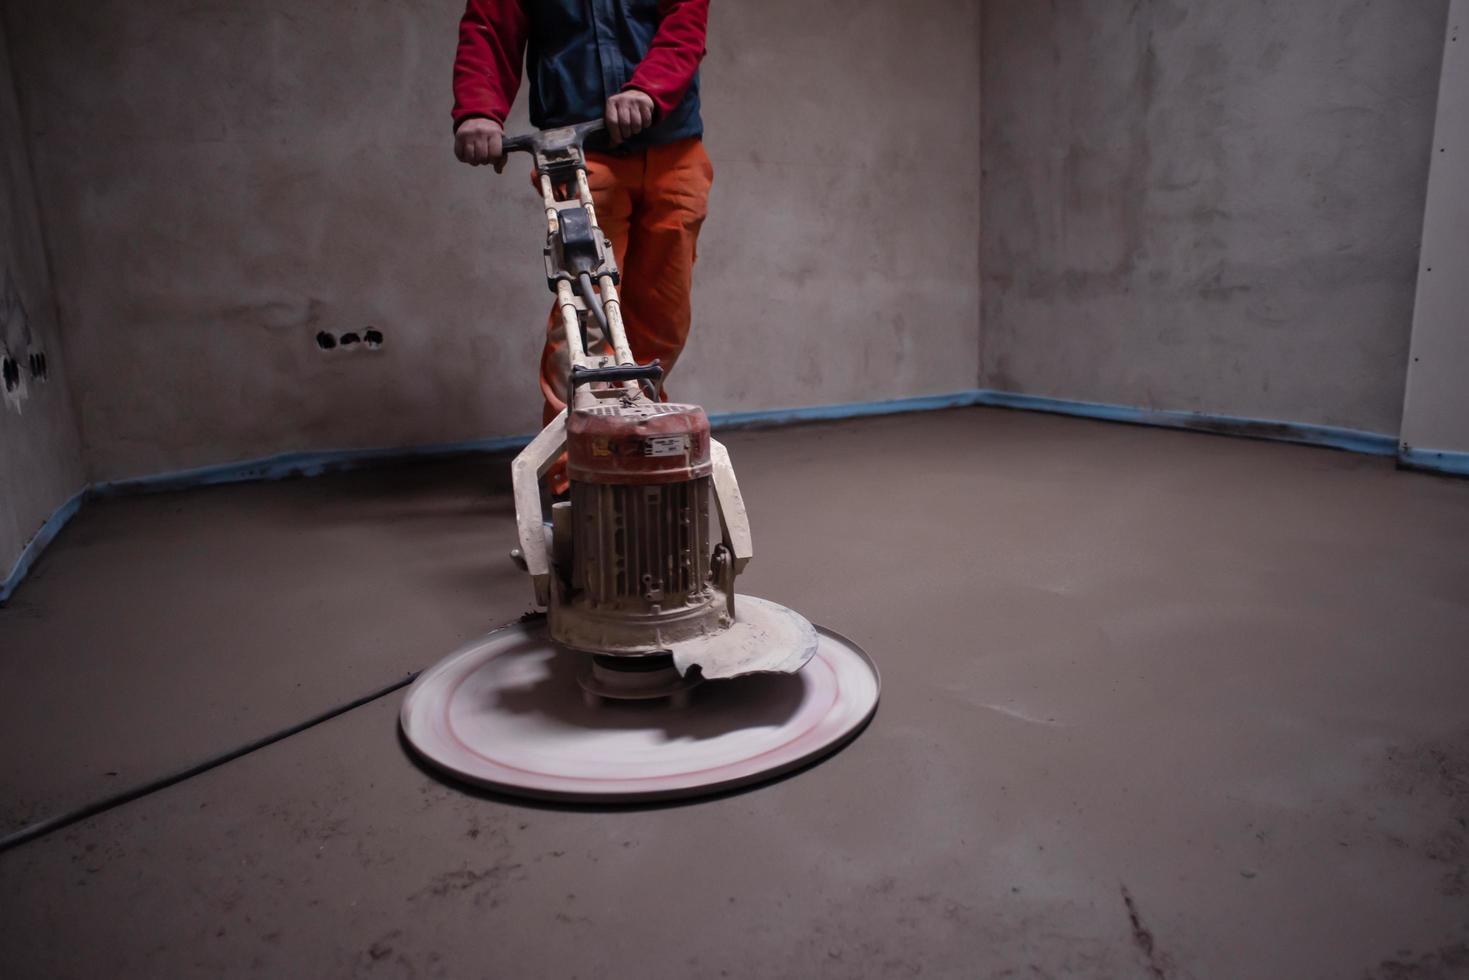 worker performing and polishing sand and cement screed floor photo